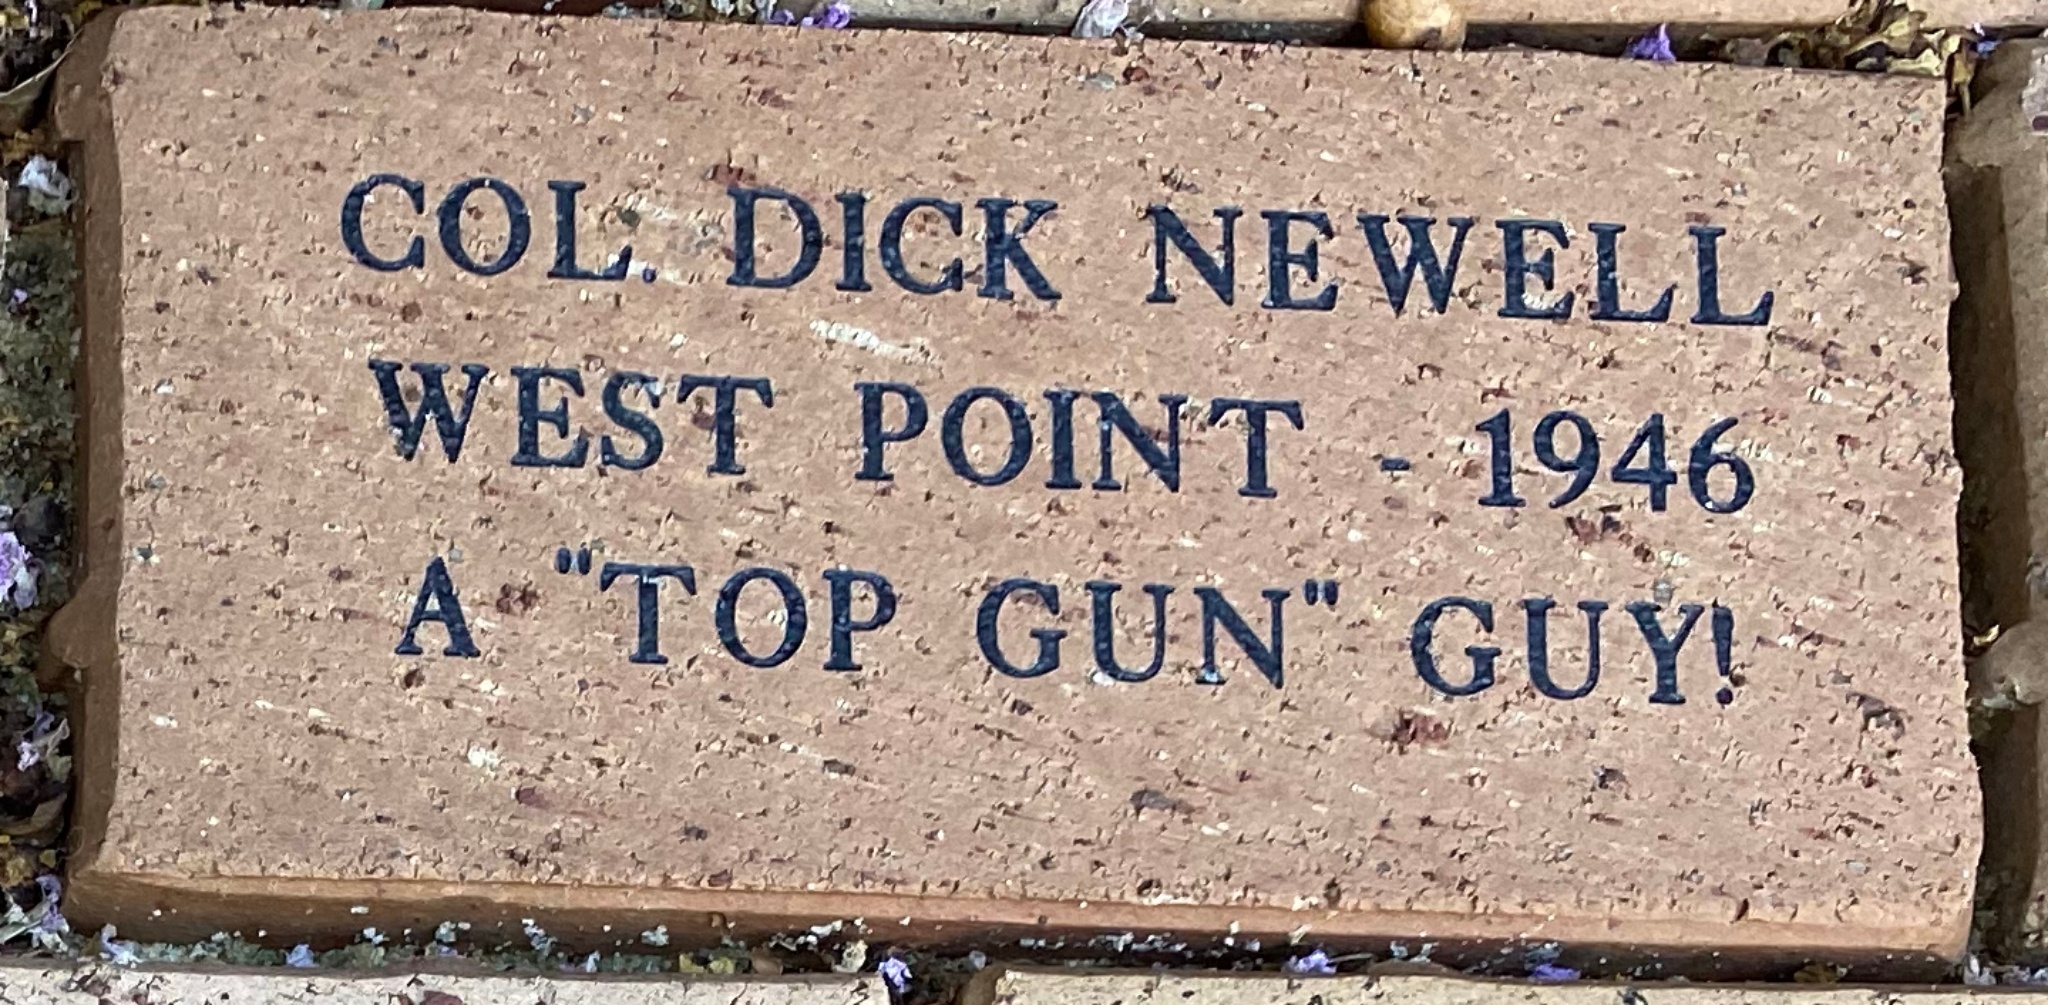 COL DICK NEWELL WEST POINT – 1946 A “TOP GUN” GUY!